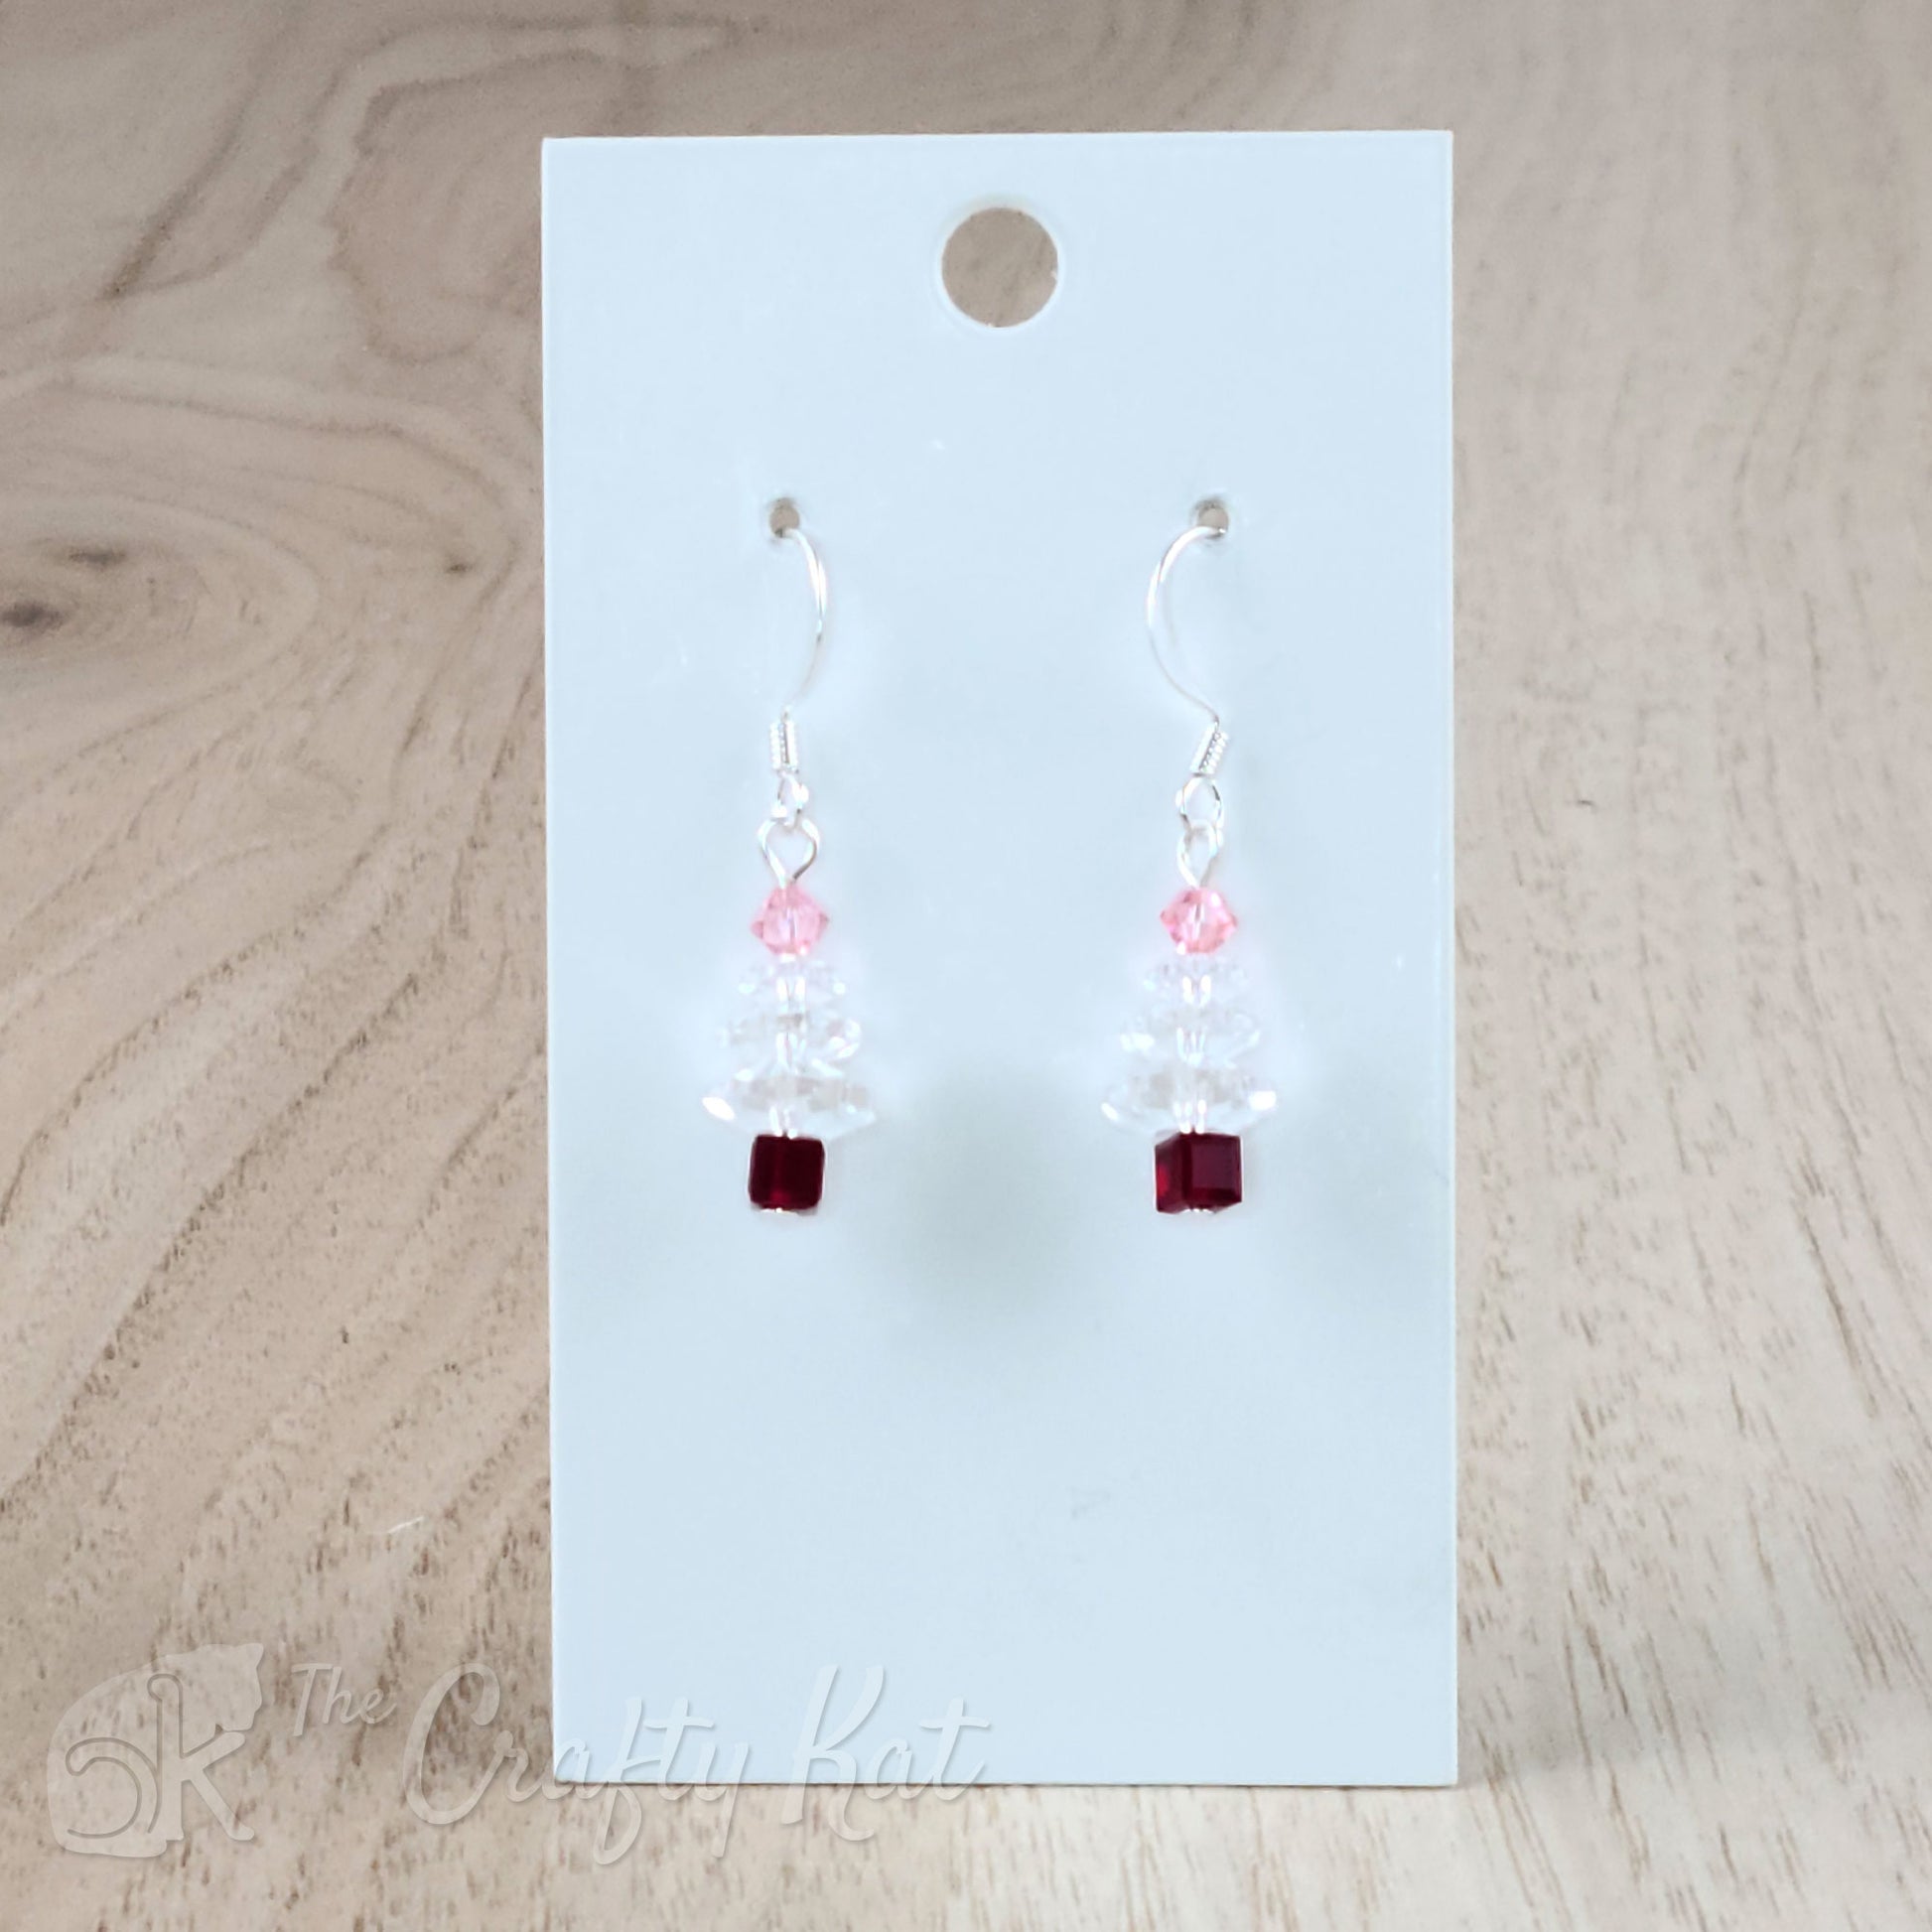 A pair of earring drops made of faceted crystal beads, each drop forming the shape of a holiday tree. This variation features a maroon base, clear branches, and a light pink topper on silver-plated base metal.